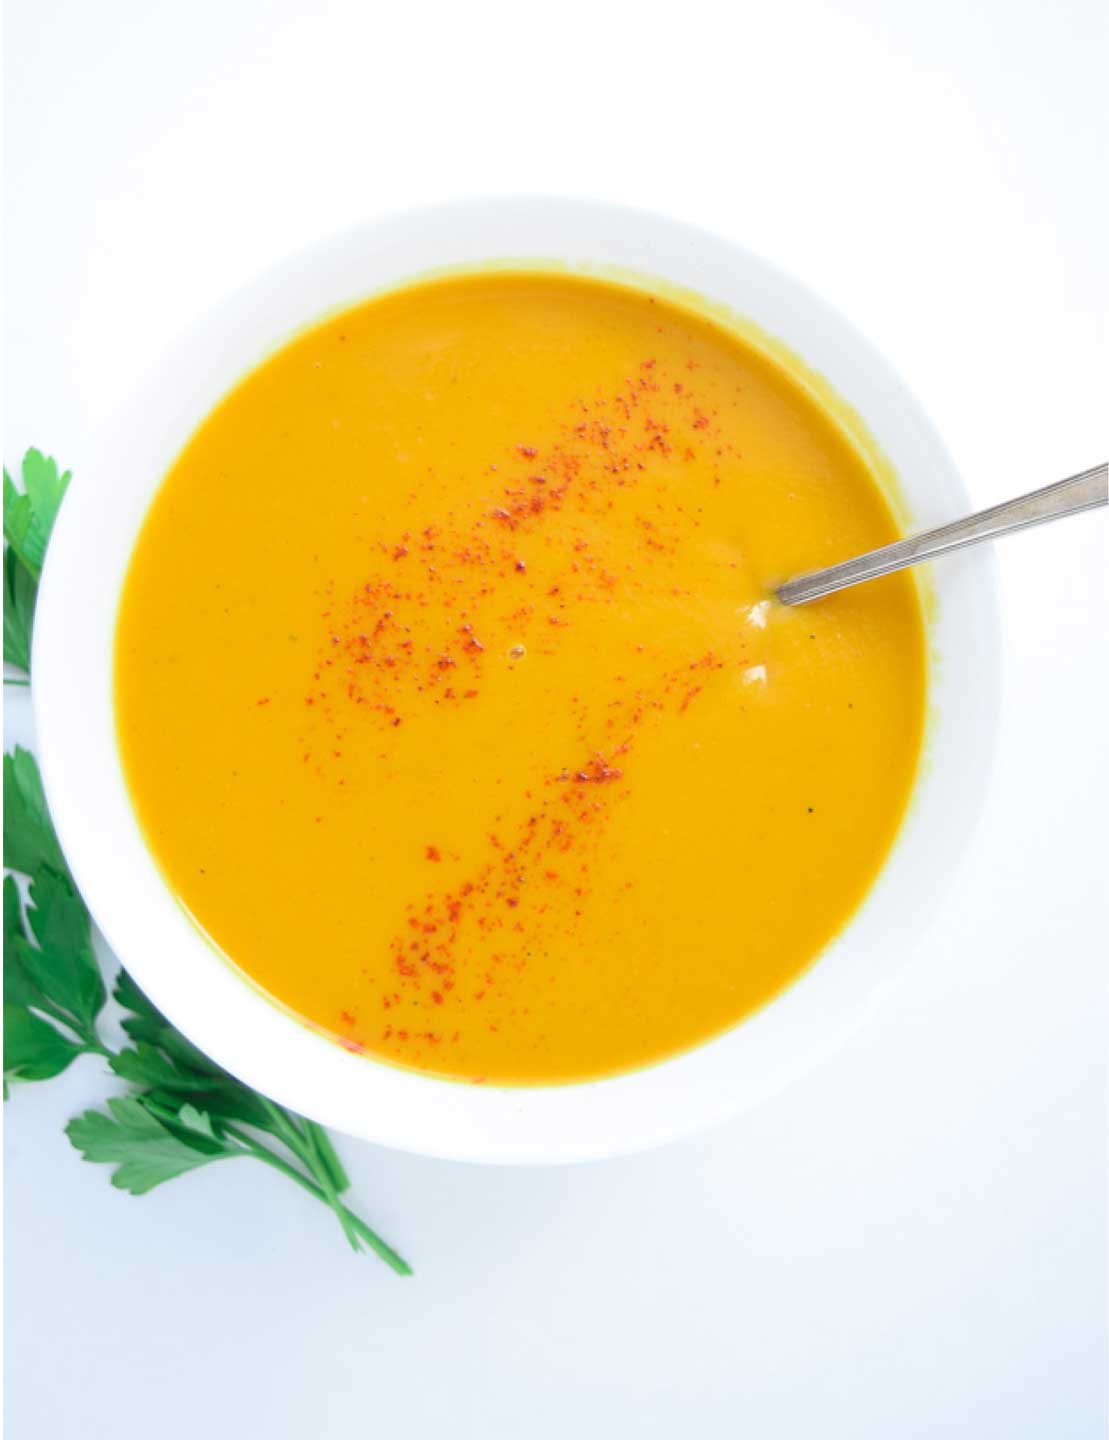 Our list of Instant Pot vegetable soup recipes includes many that are vegan or, like this Instant Pot Detox Turmeric Veggie Soup from Nikki at Tastythin, can be adapted to be made vegan.